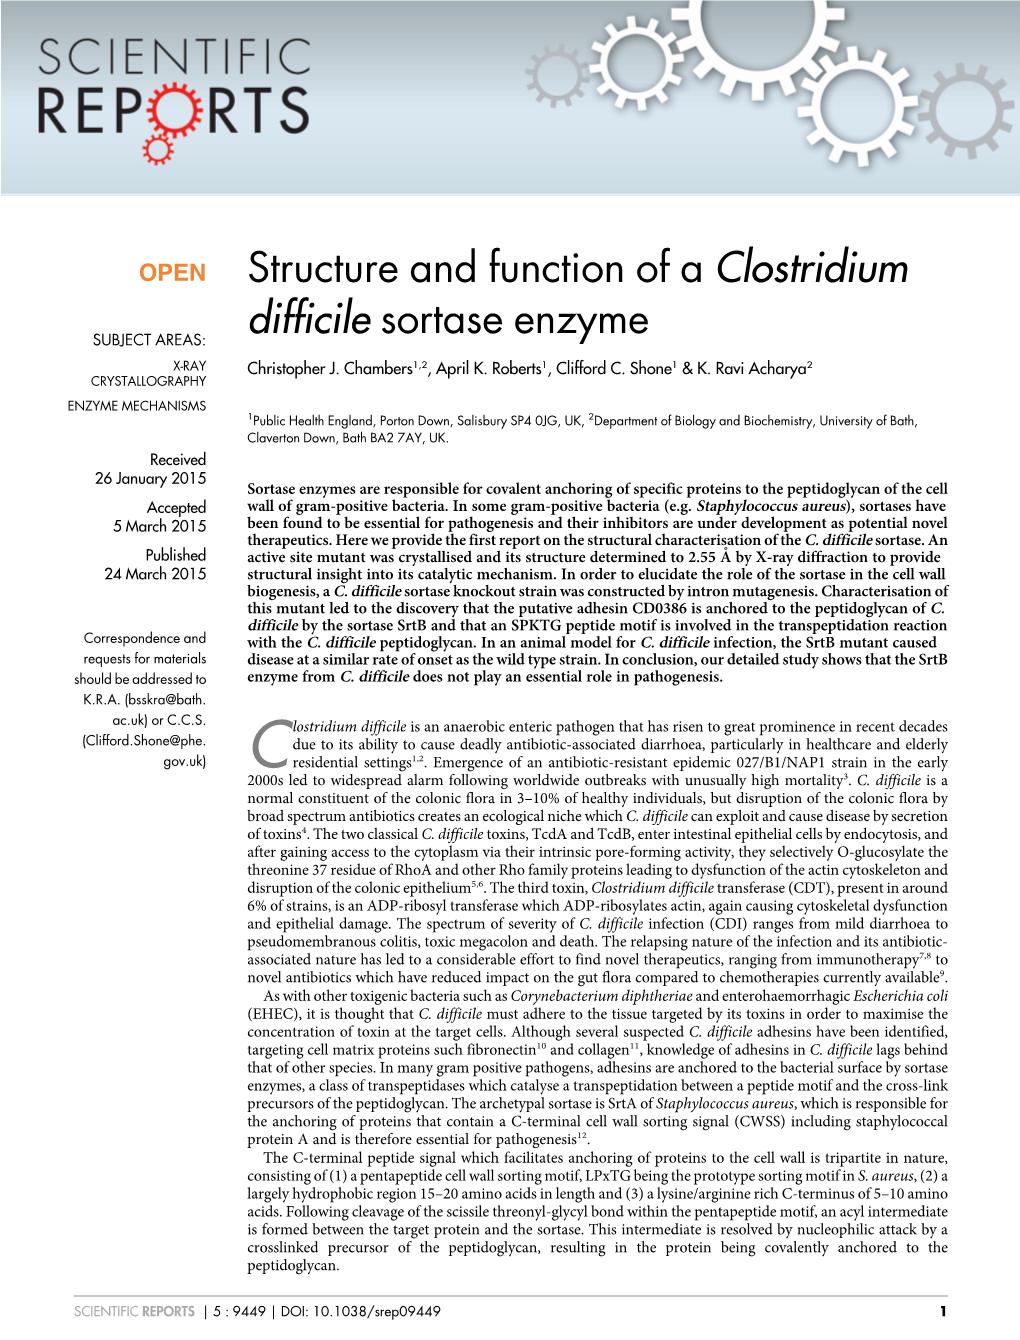 Structure and Function of a Clostridium Difficile Sortase Enzyme